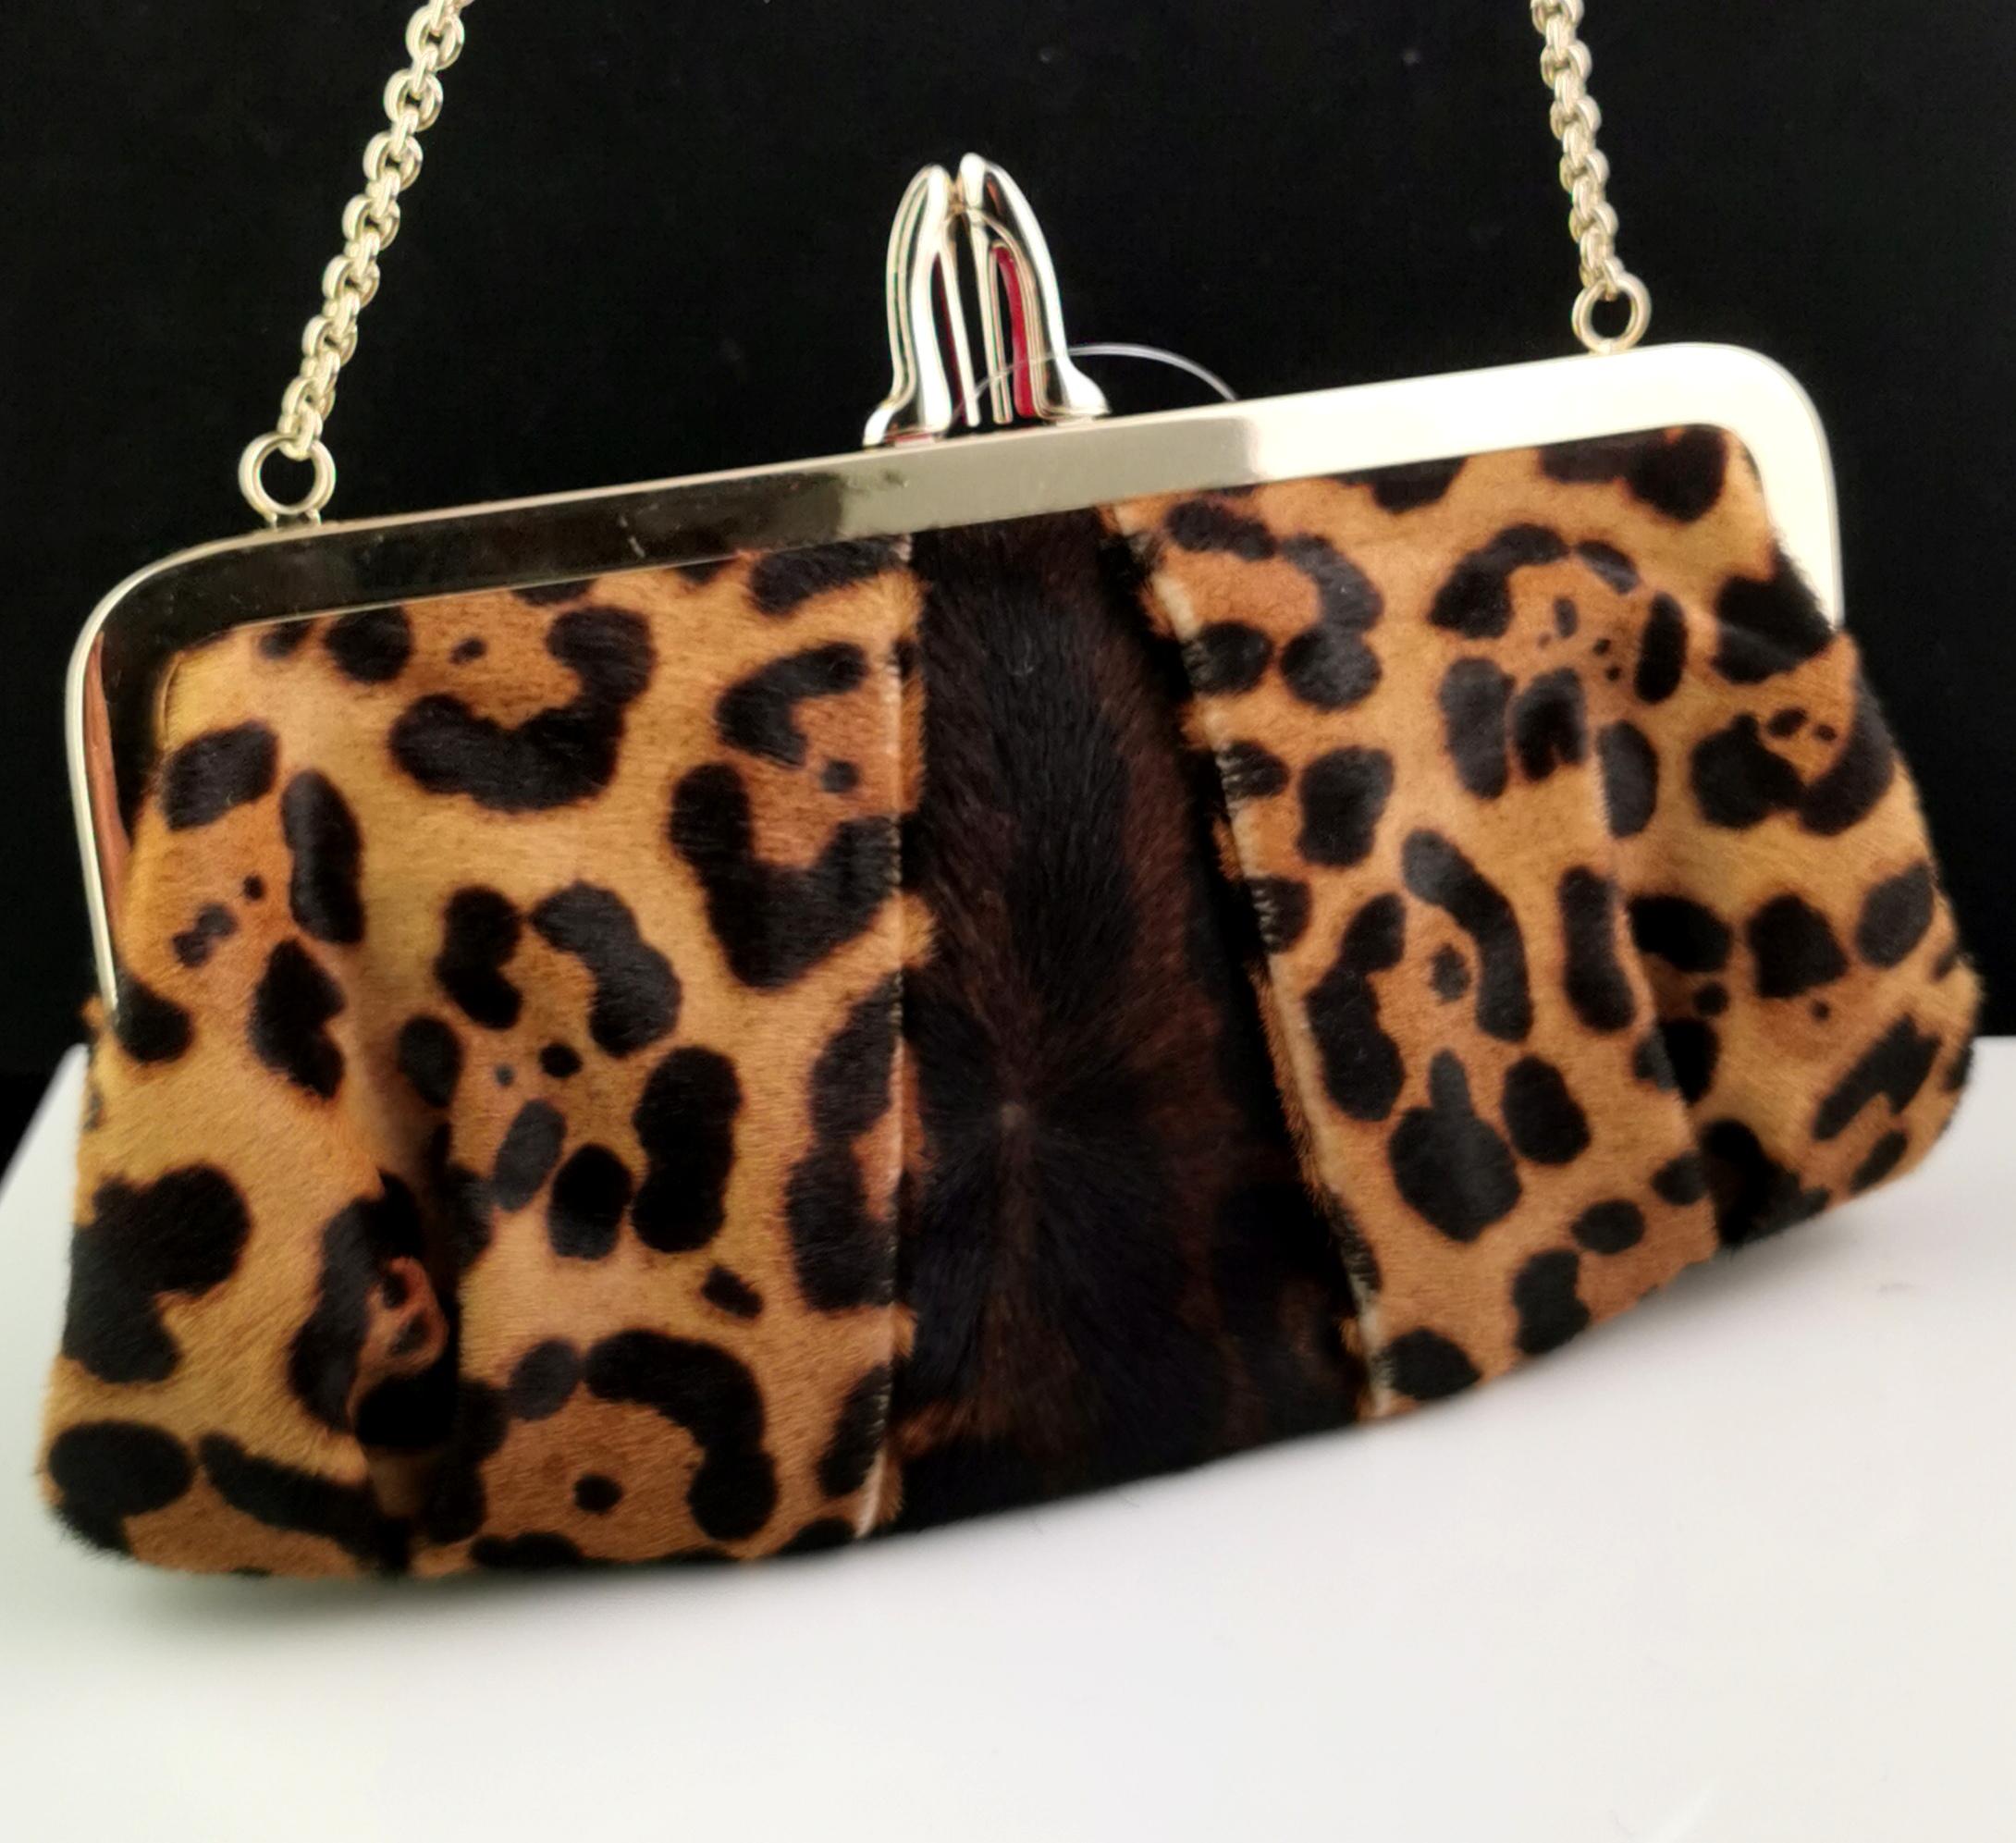 A truly stunning vintage Christian Louboutin, Loubi Lula leopard print, pony style skin clutch purse.

It has a lovely leopard print design with folded pleat corners and an iconic high heel kiss lock clasp with the memorable red soles.

The hardware